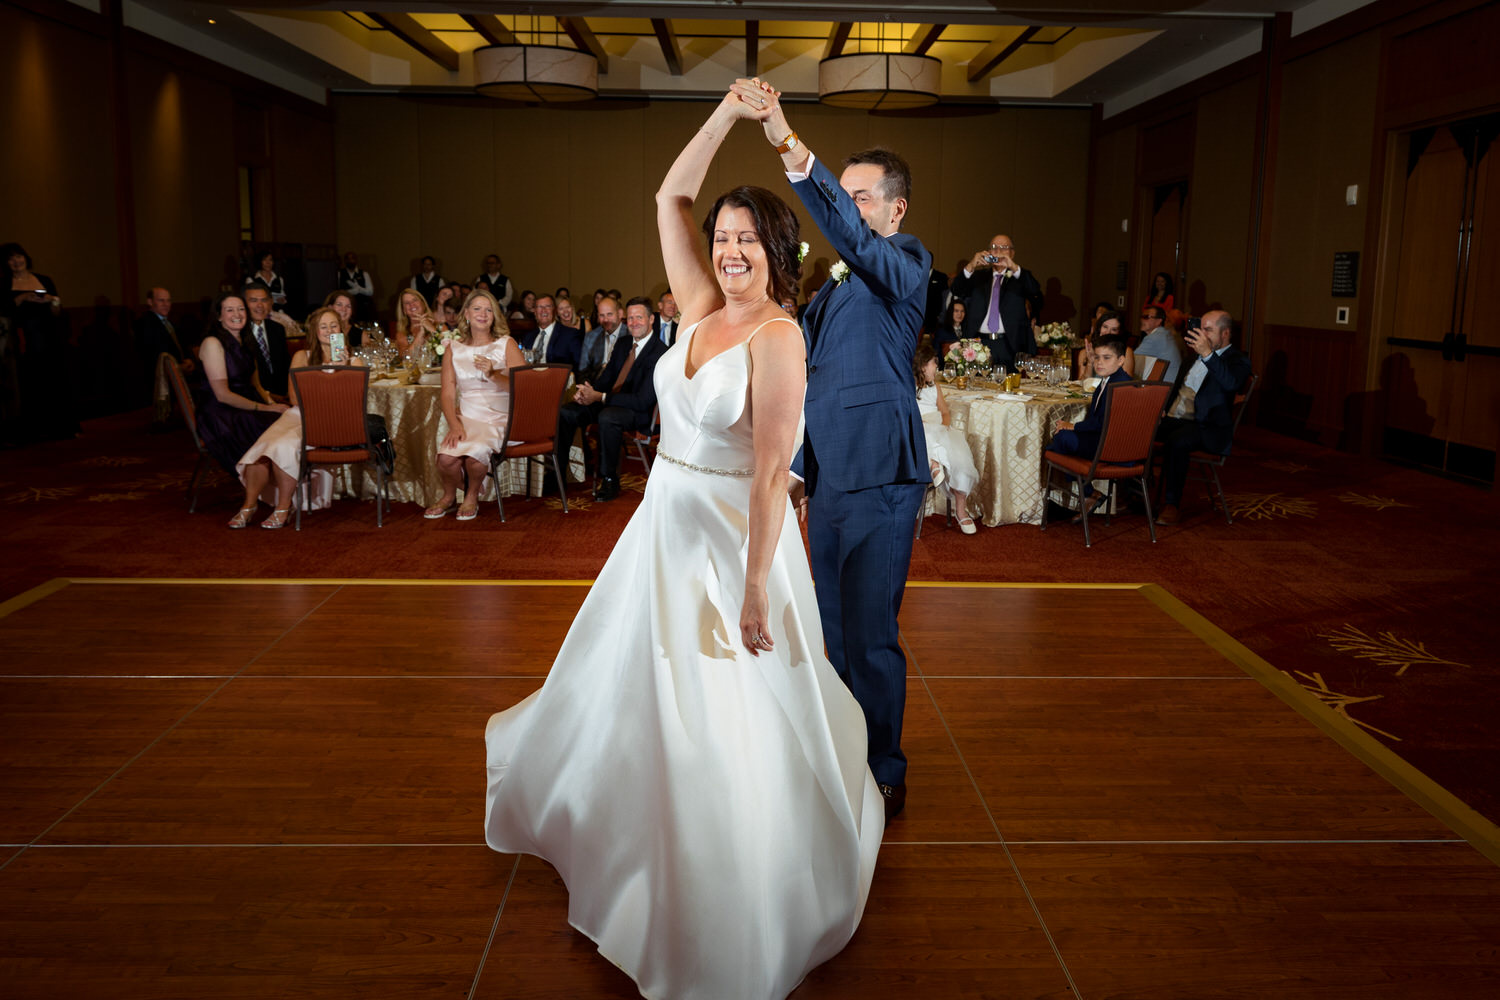 The bride and groom enjoy their first dance at a reception in the Ritz Carlton Ballroom.